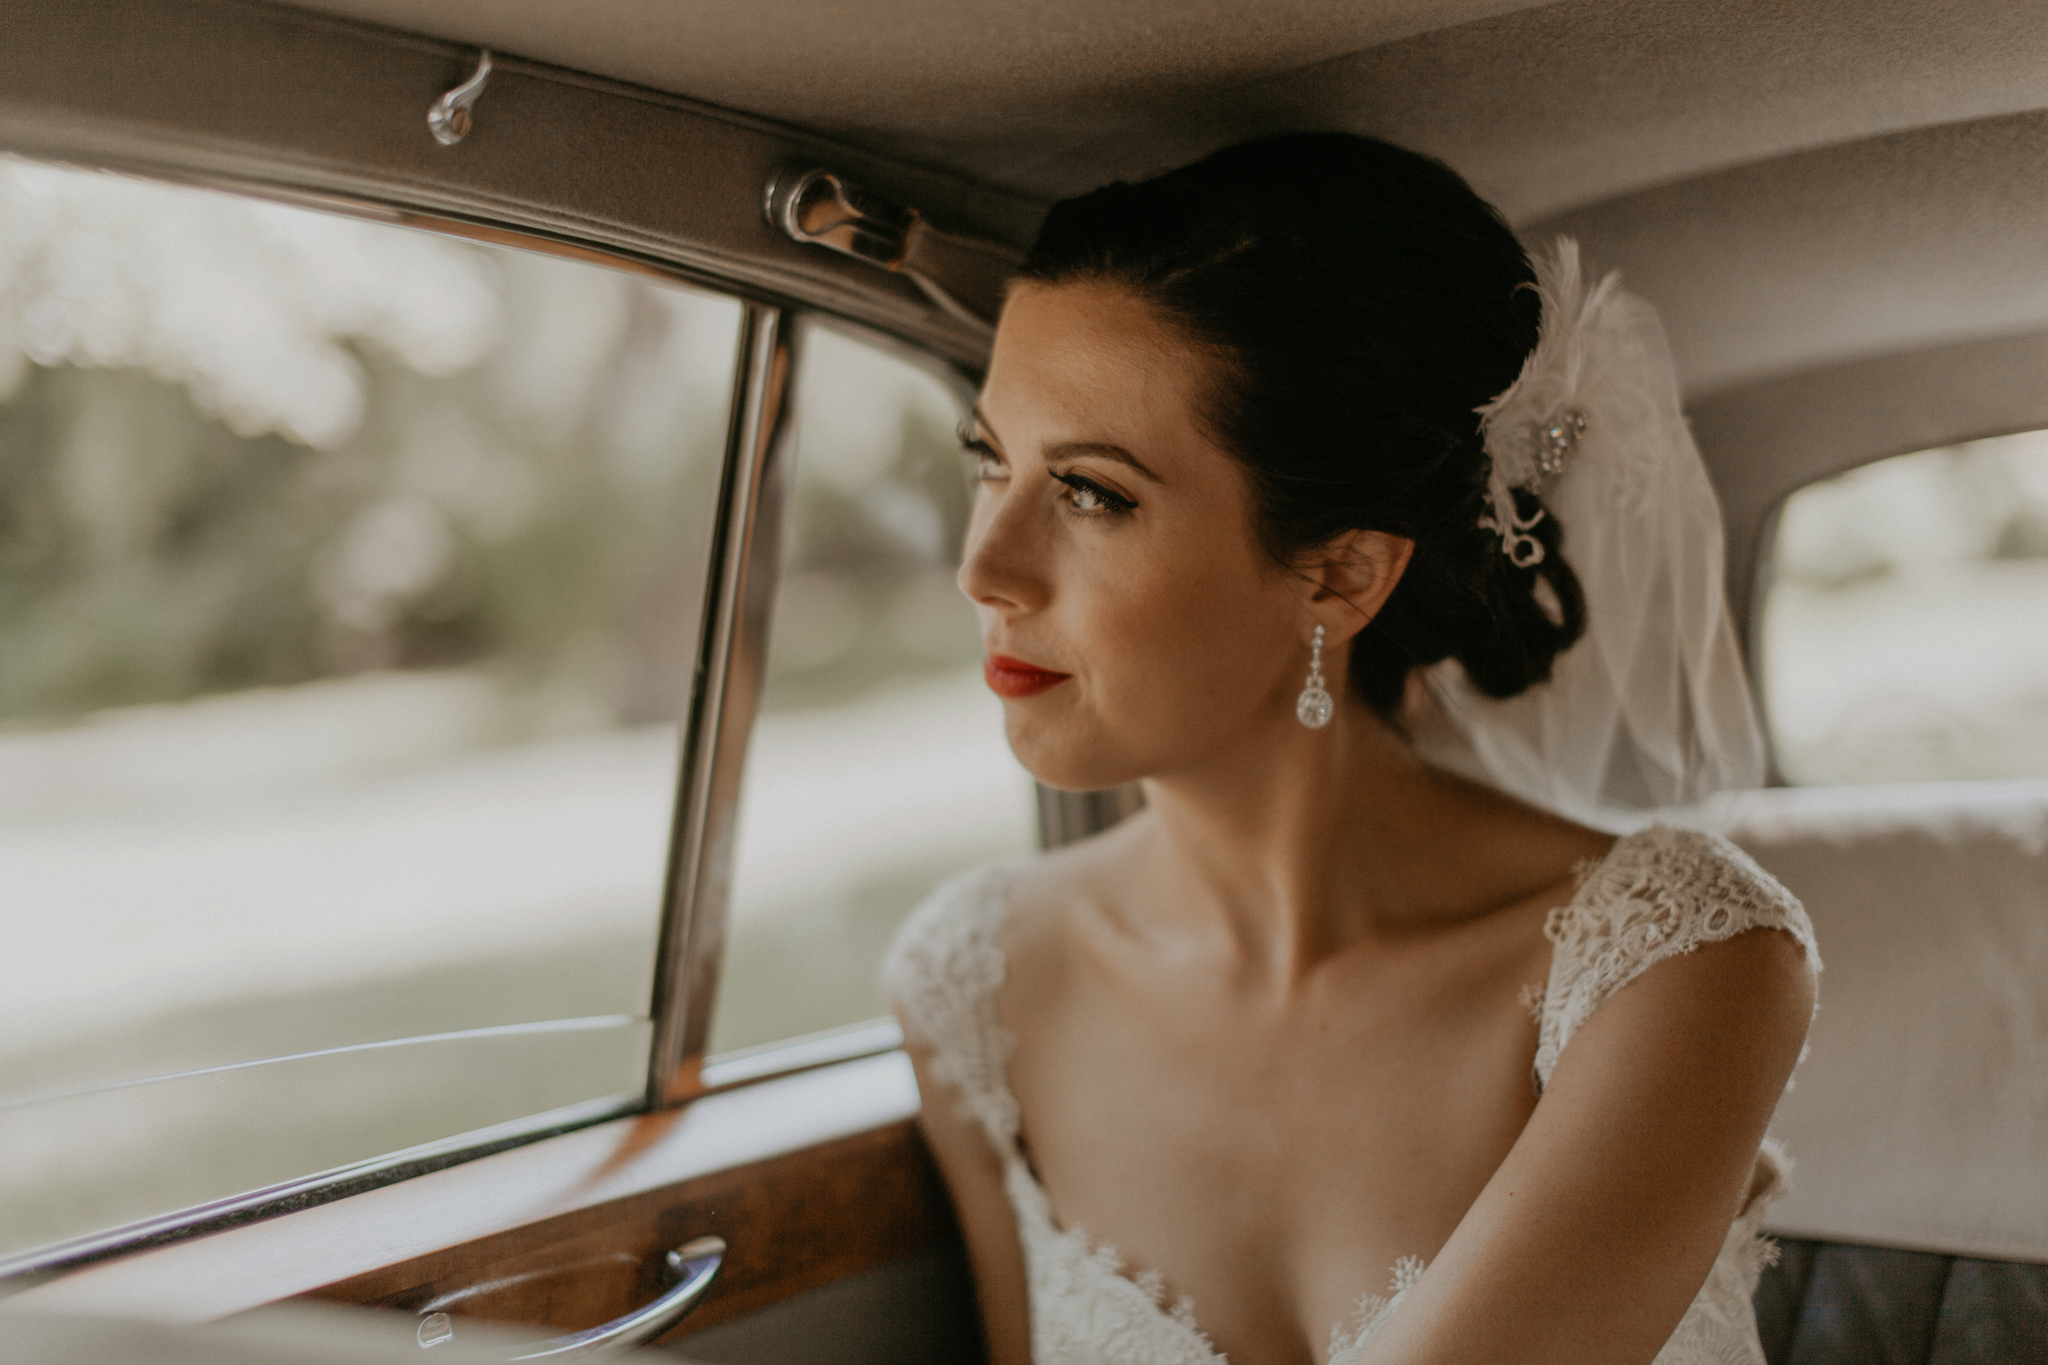 Candid documentary photo of bride riding in car